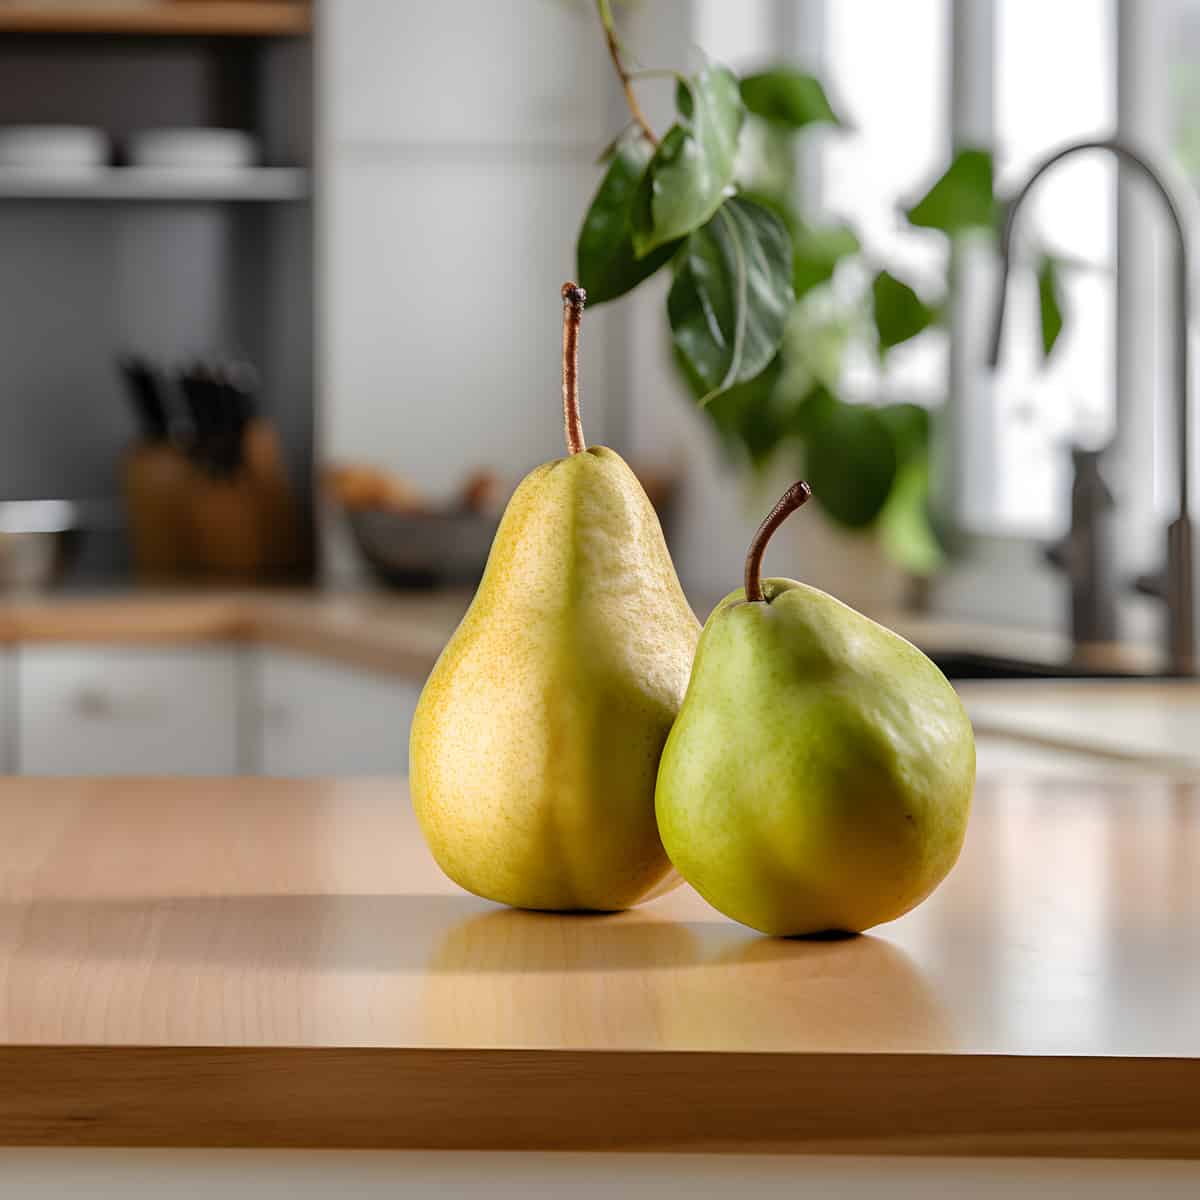 Ussurian Pear on a kitchen counter